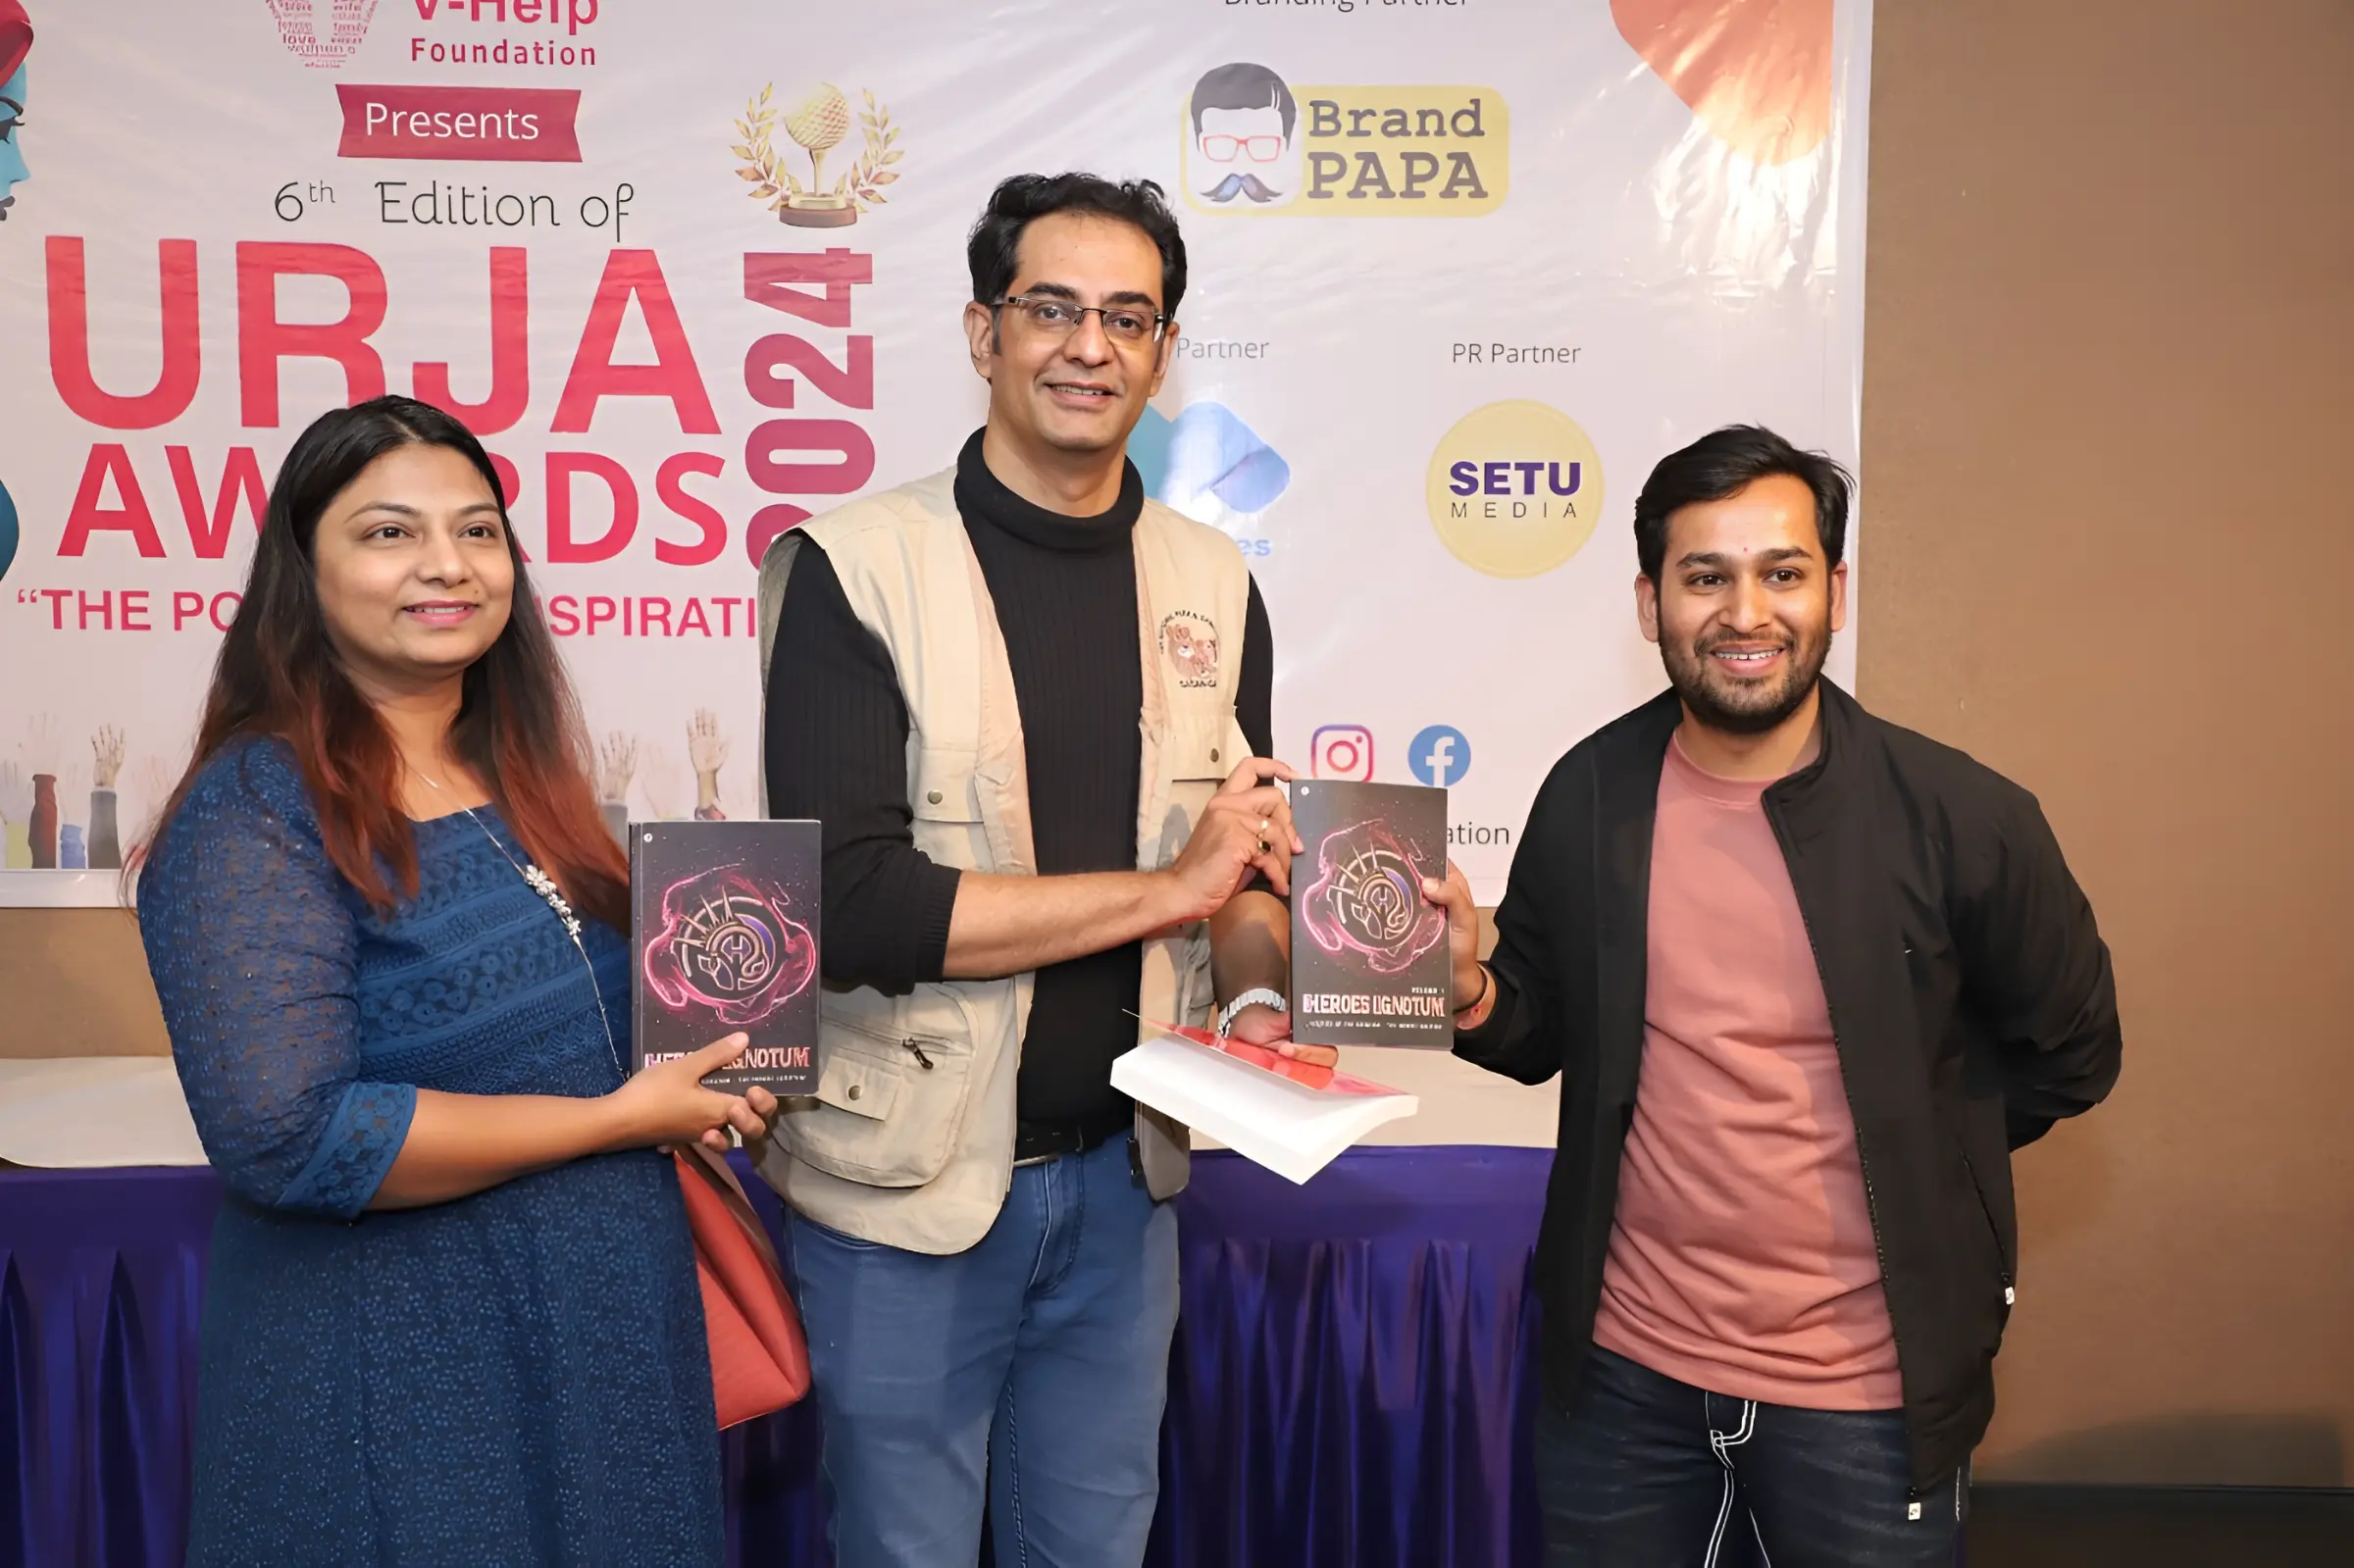 Unforgettable moments with Mr. Vision Raval and Shanu Shah to present Heroes Ignotum Book